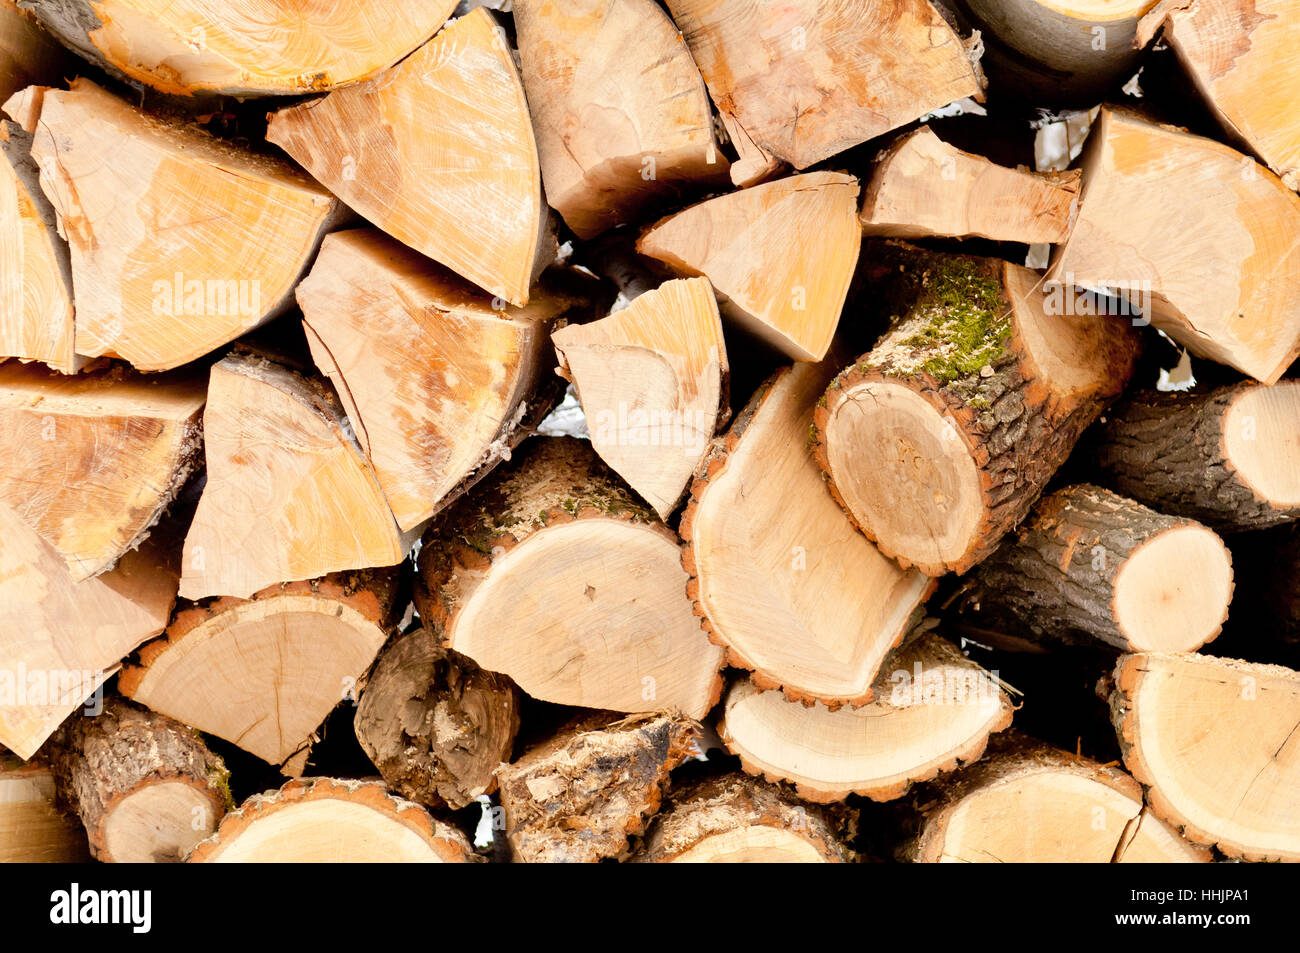 Natural wooden background, chopped firewood on stack Stock Photo